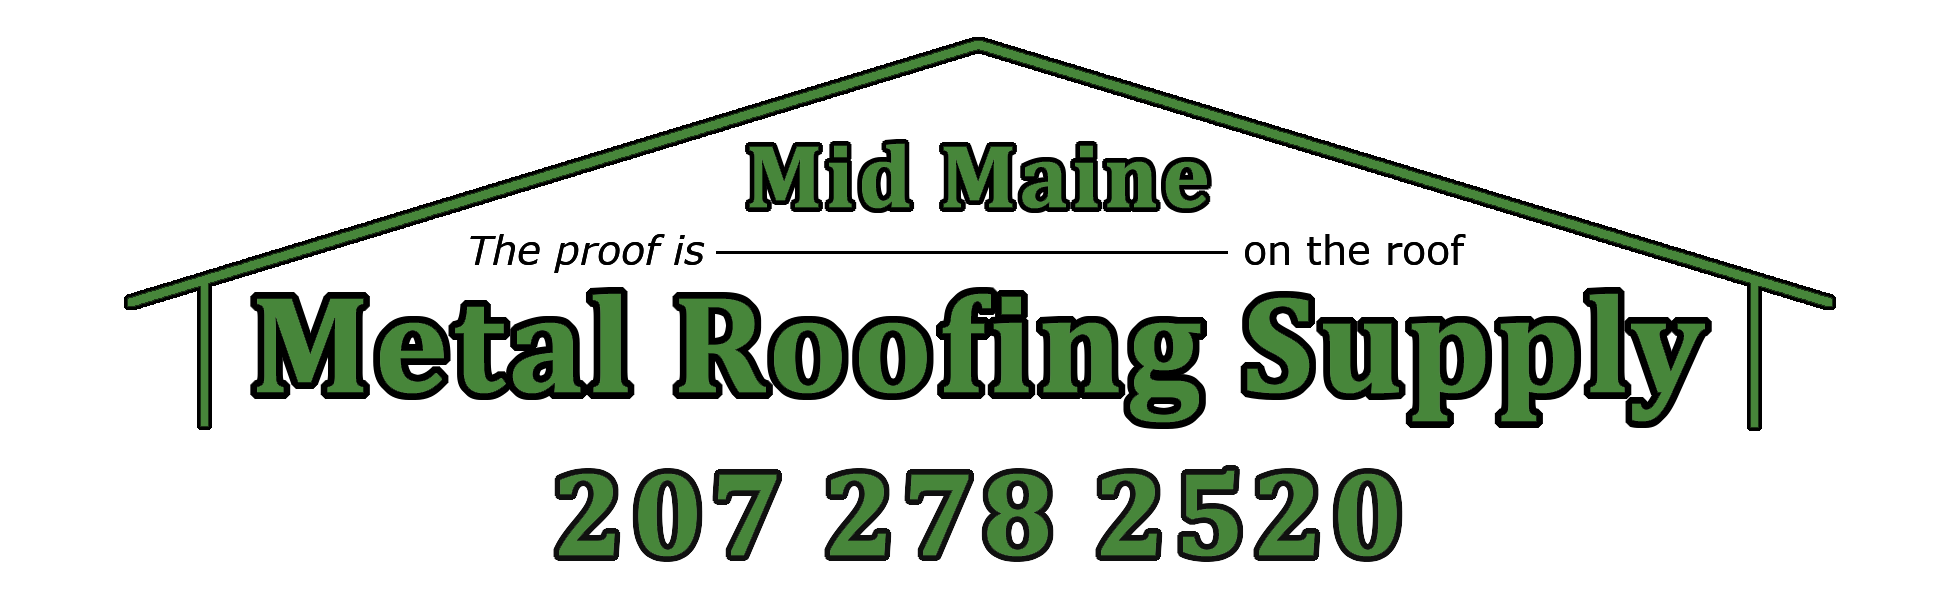 Mid Maine Metal Roofing Supply 207-278-2520